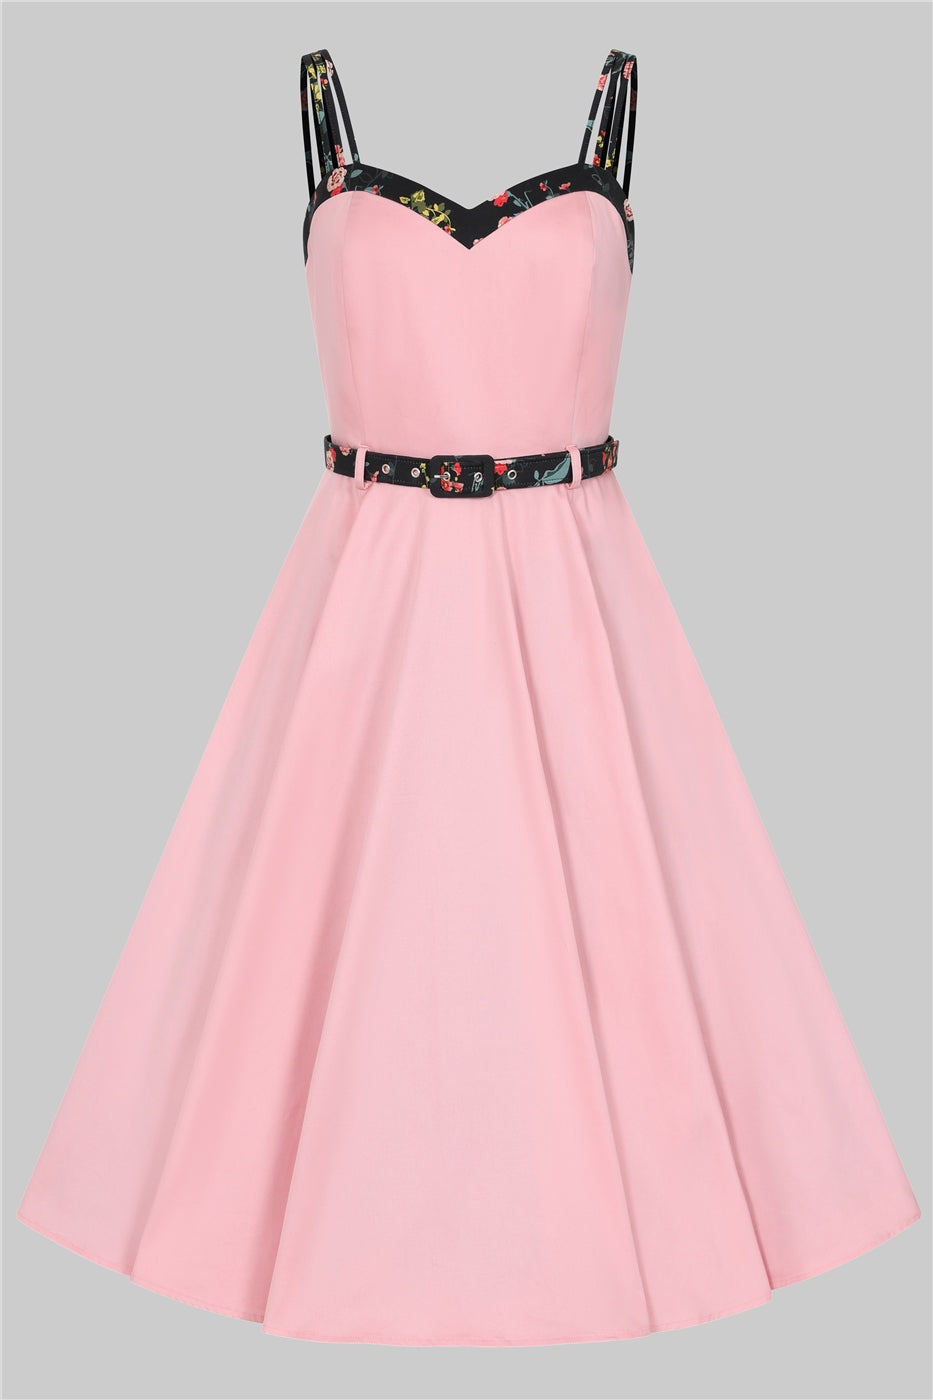 pink mid length Nova dress by Collectif with floral navy blue Hollyhocks print sweetheart neckline, straps and belt to add contrast.